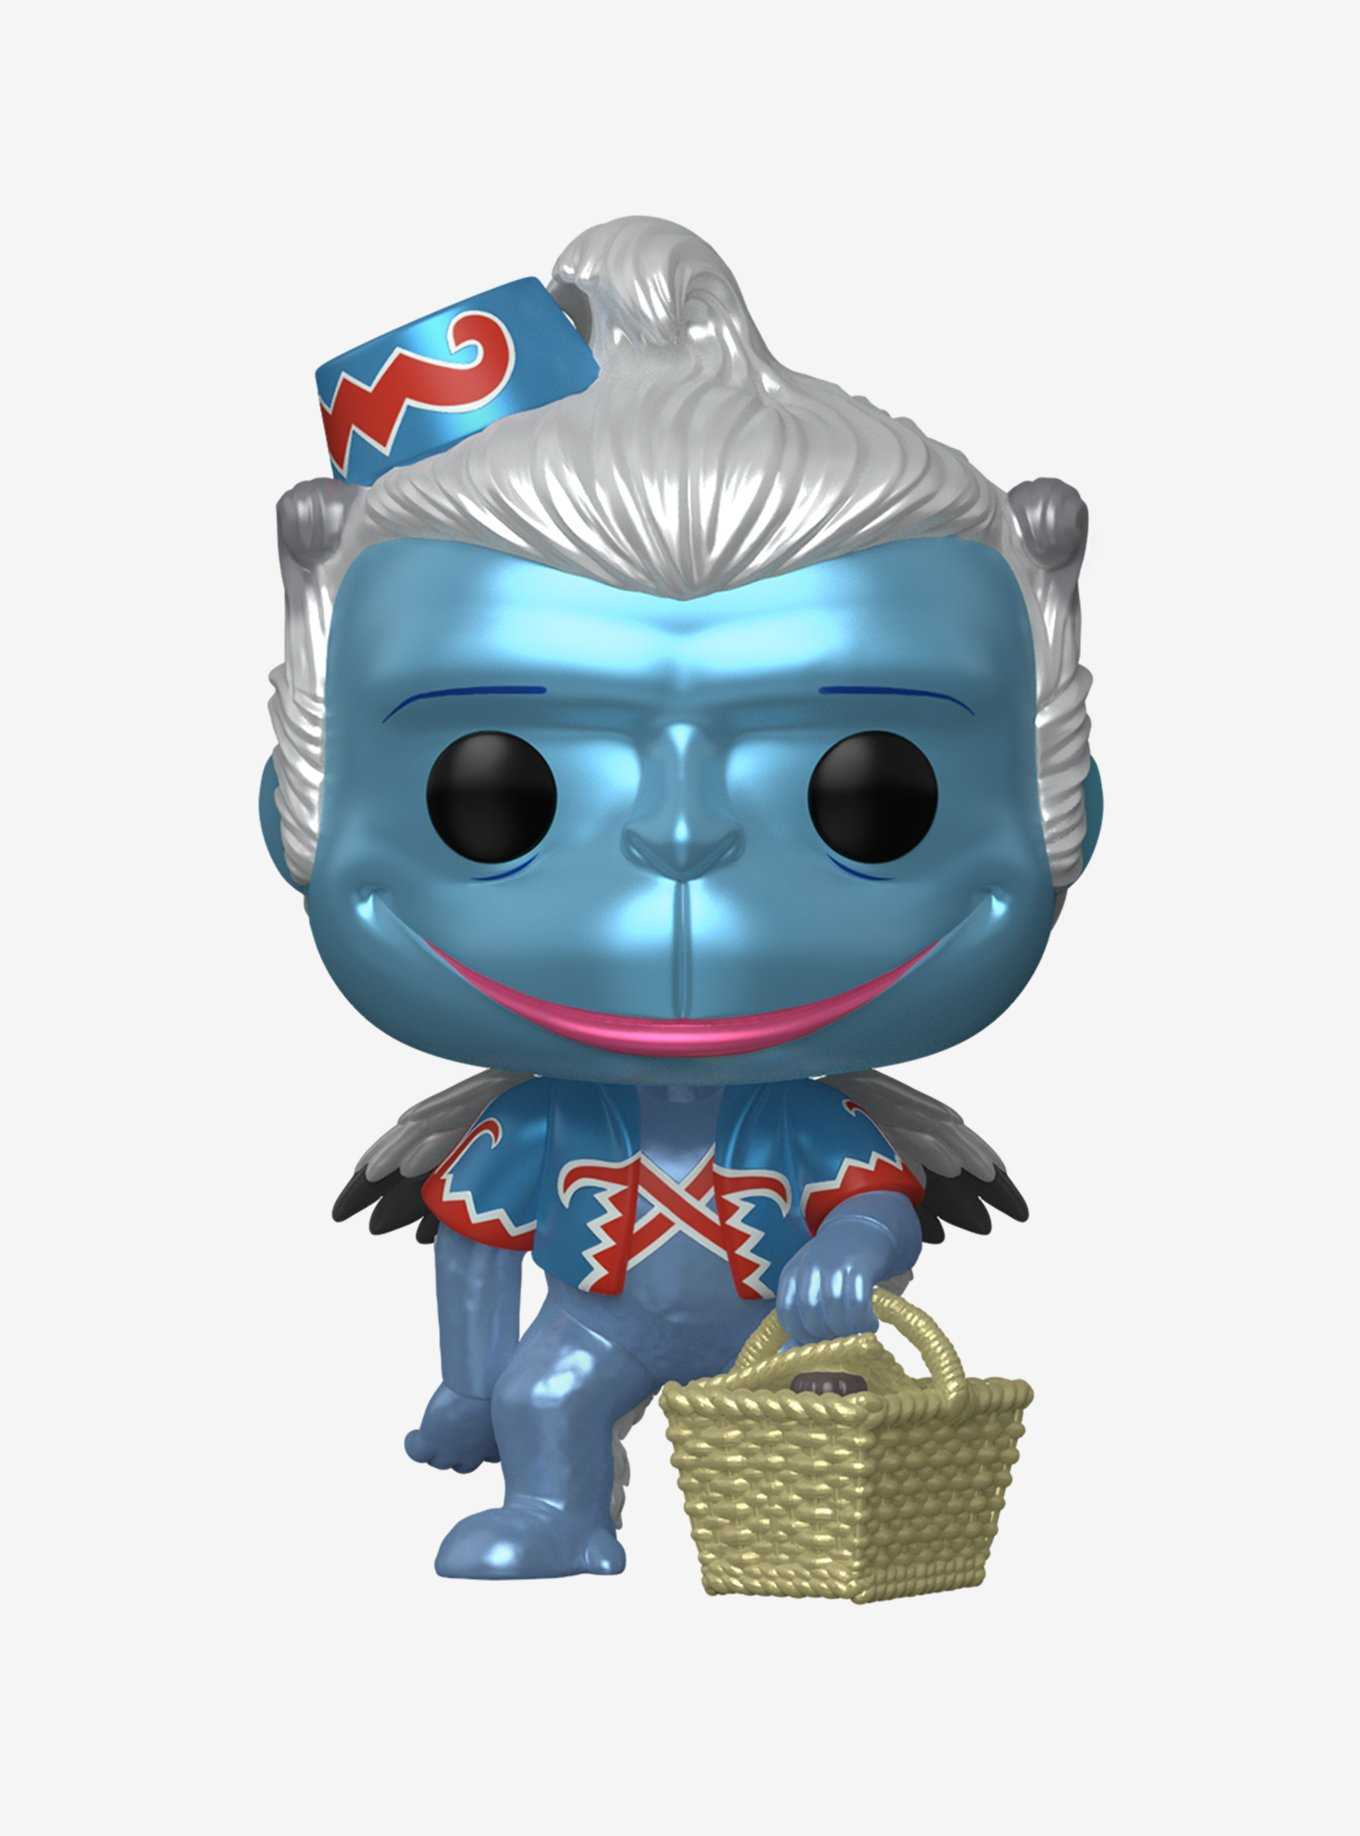 Funko The Wizard Of Oz Pop! Movies Winged Monkey Vinyl Figure Specialty Series Exclusive, , hi-res